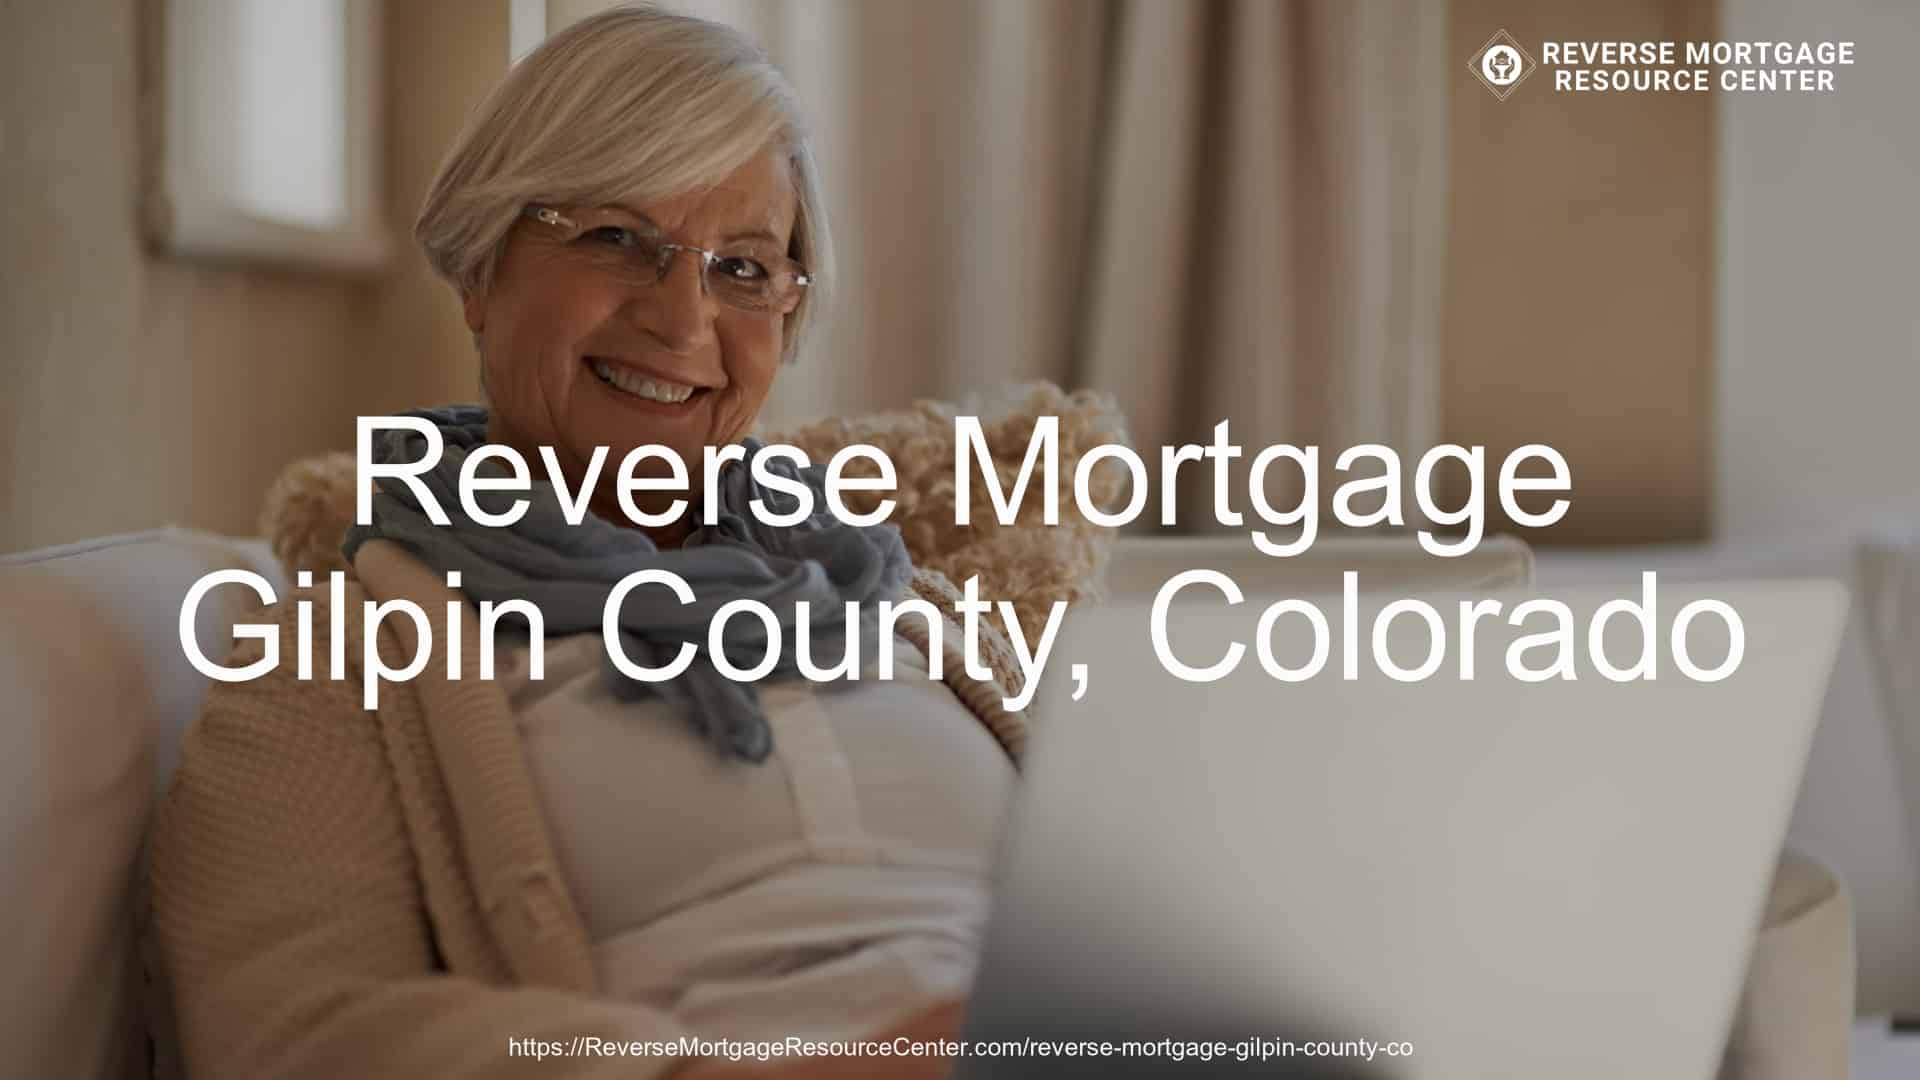 Reverse Mortgage Loans in Gilpin County Colorado